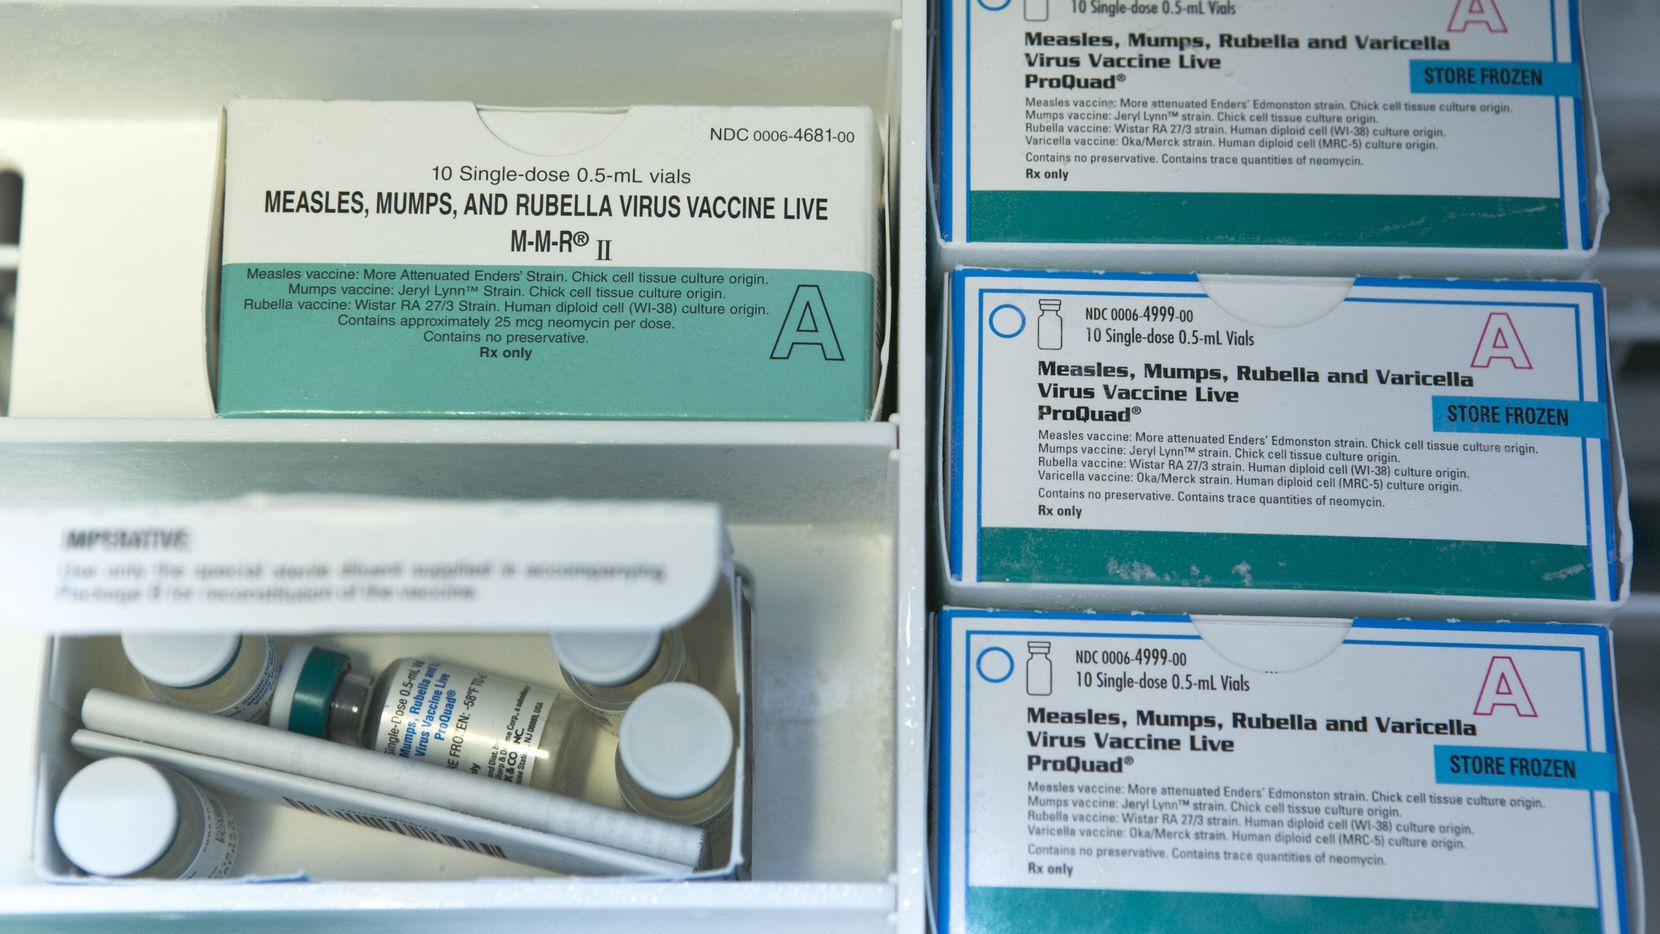 The Centers for Disease Control and Prevention recommends children get two doses of the measles, mumps and rubella vaccine — one between 12 and 15 months and the second between ages 4 and 6 — to be fully protected against measles.